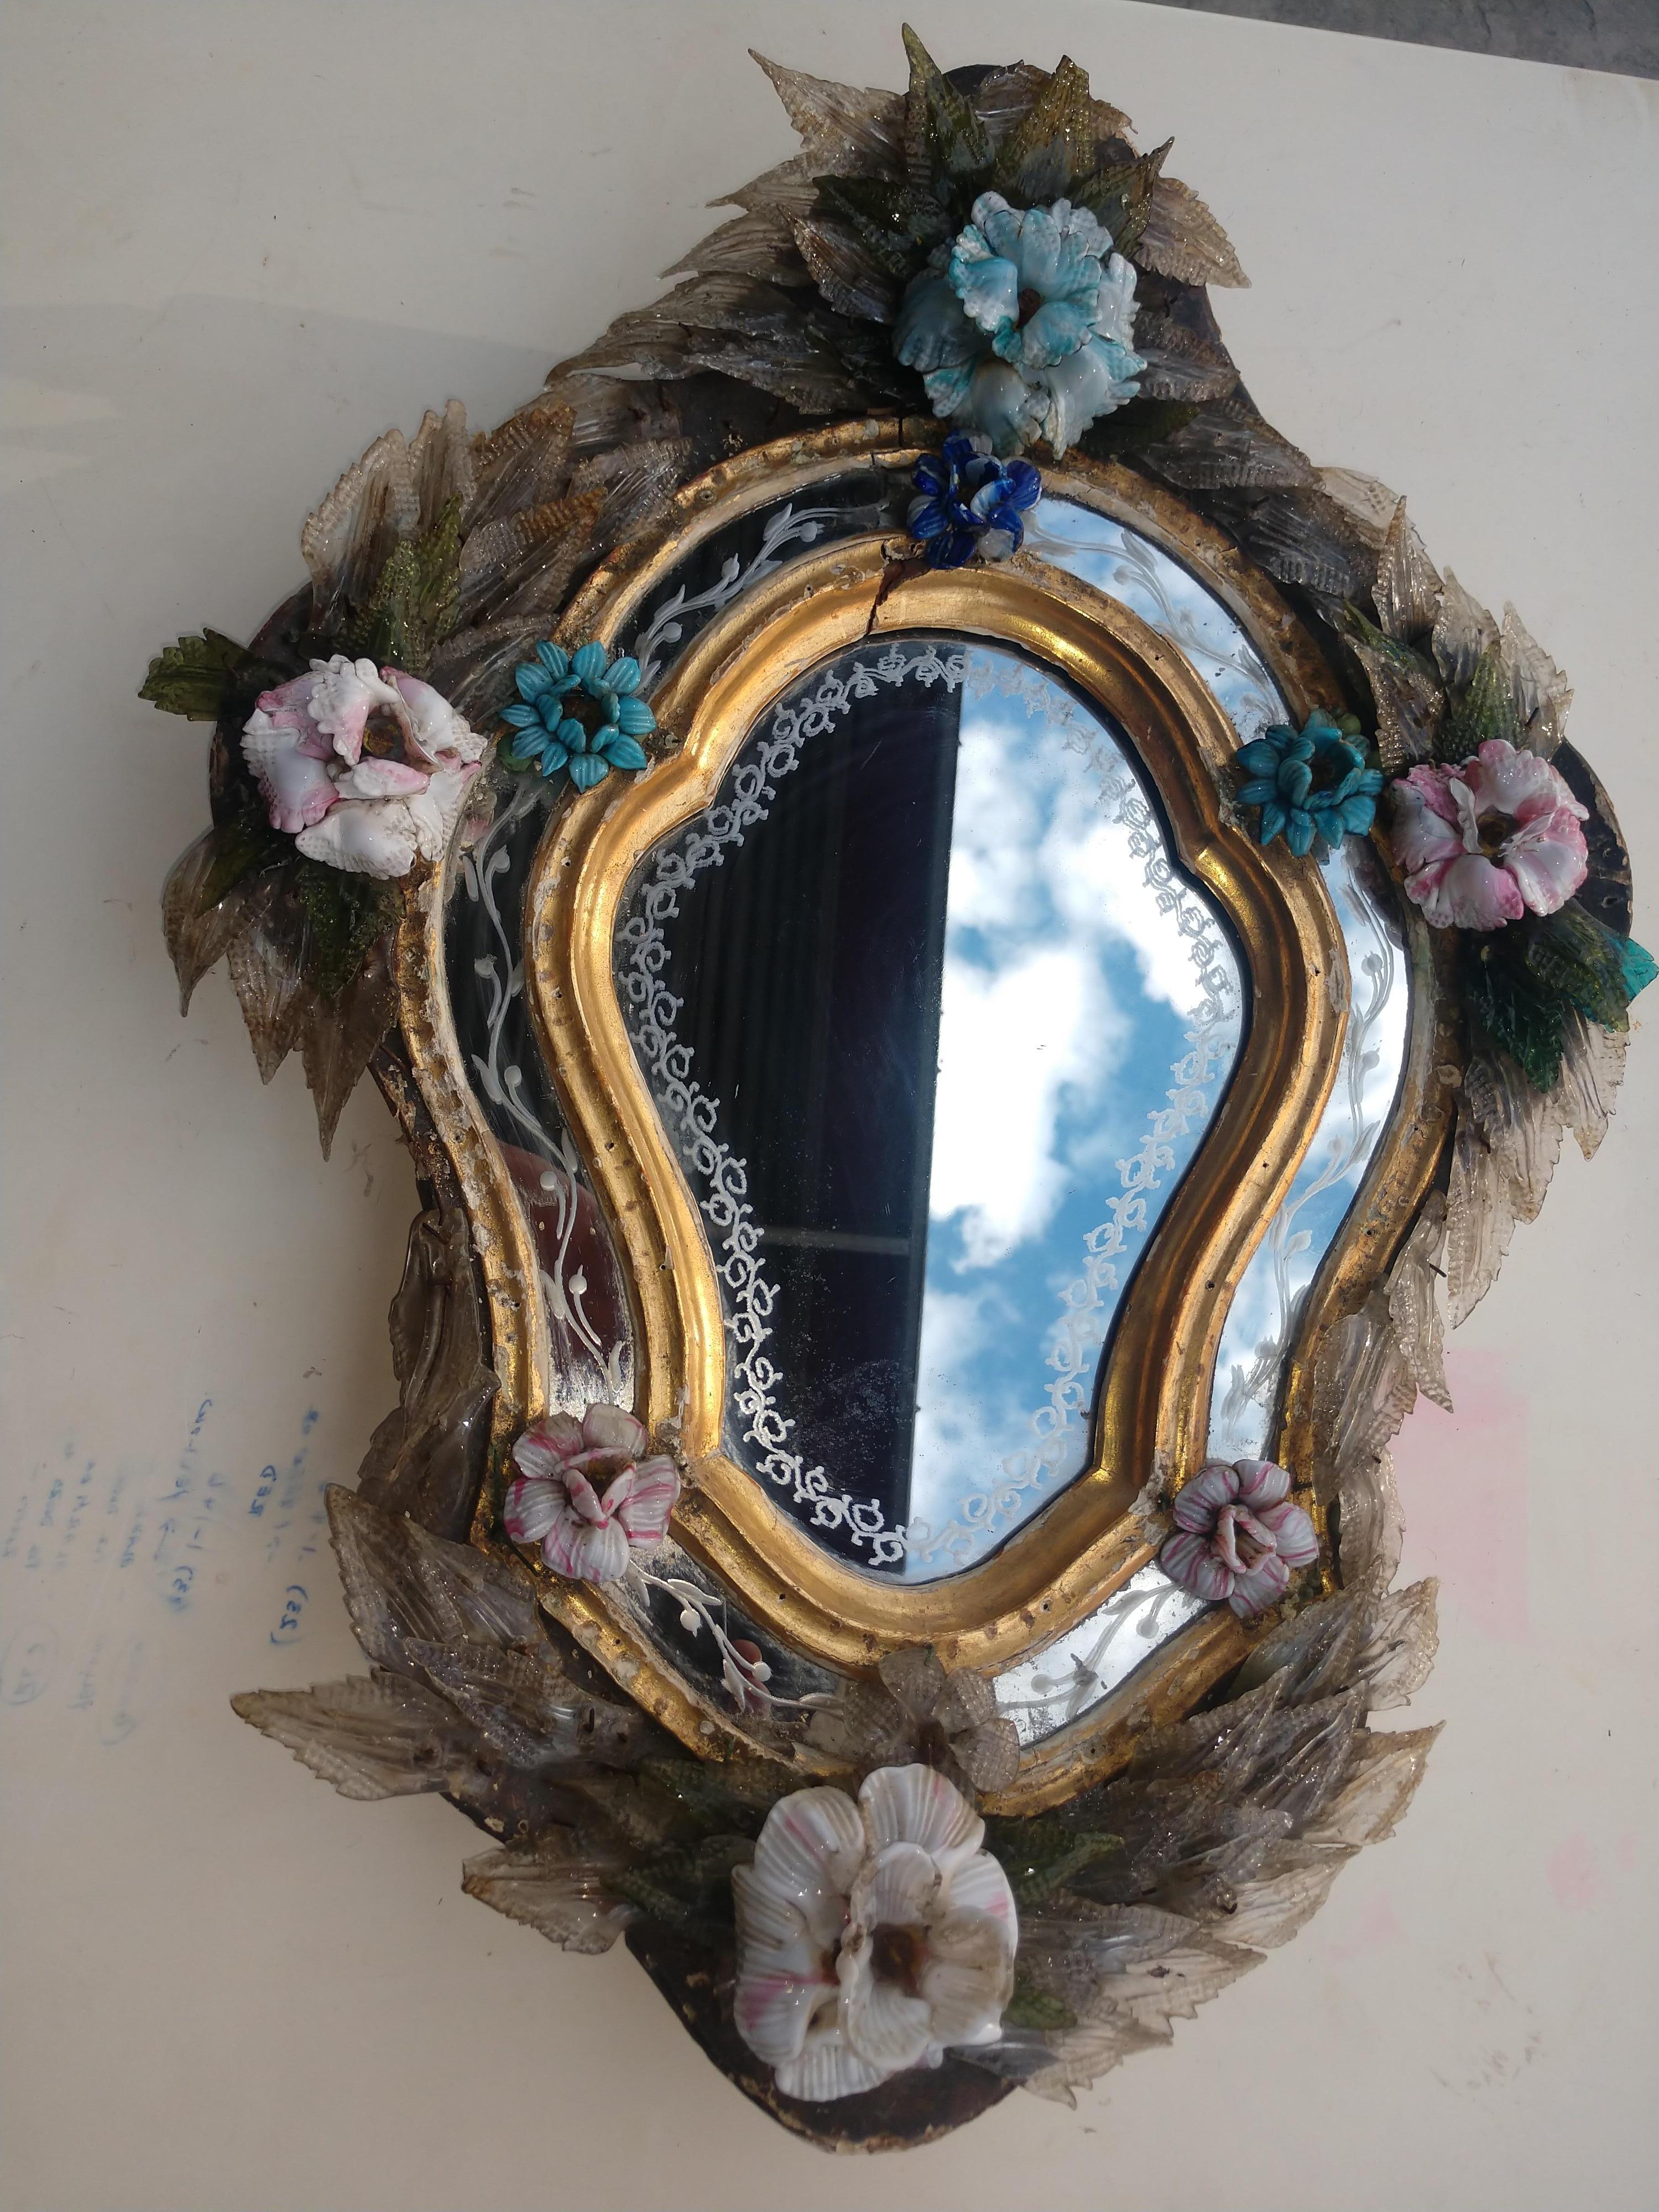 Petite 19thC Venetian Murano Etched Mirror with Flowers and Leaves. 8